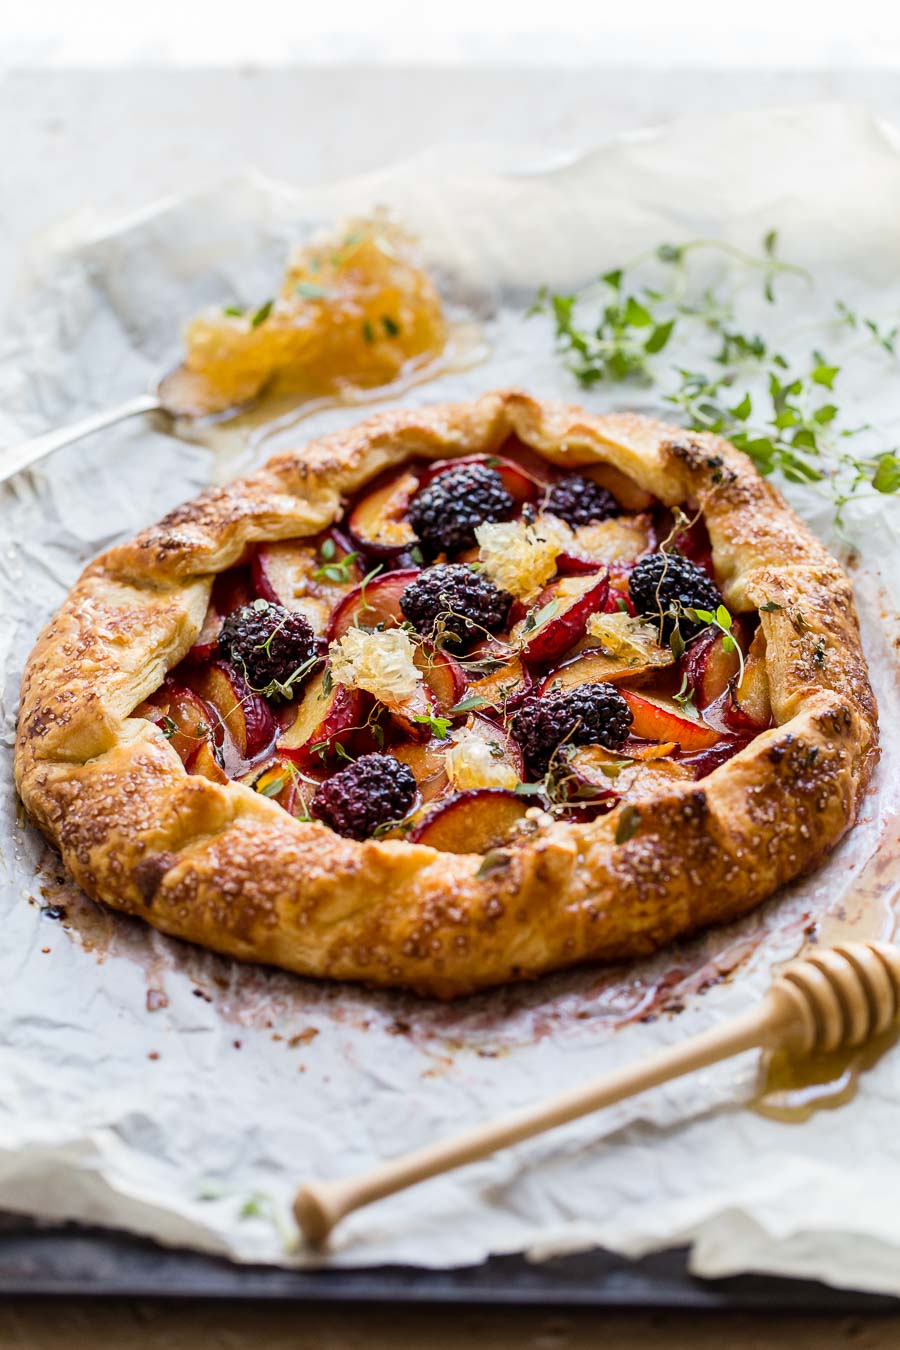 Round cornmeal pastry galette filled with roasted plums and blackberries, drizzled with honey, sitting on a greaseproof sheet with green micro herbs and honeycomb